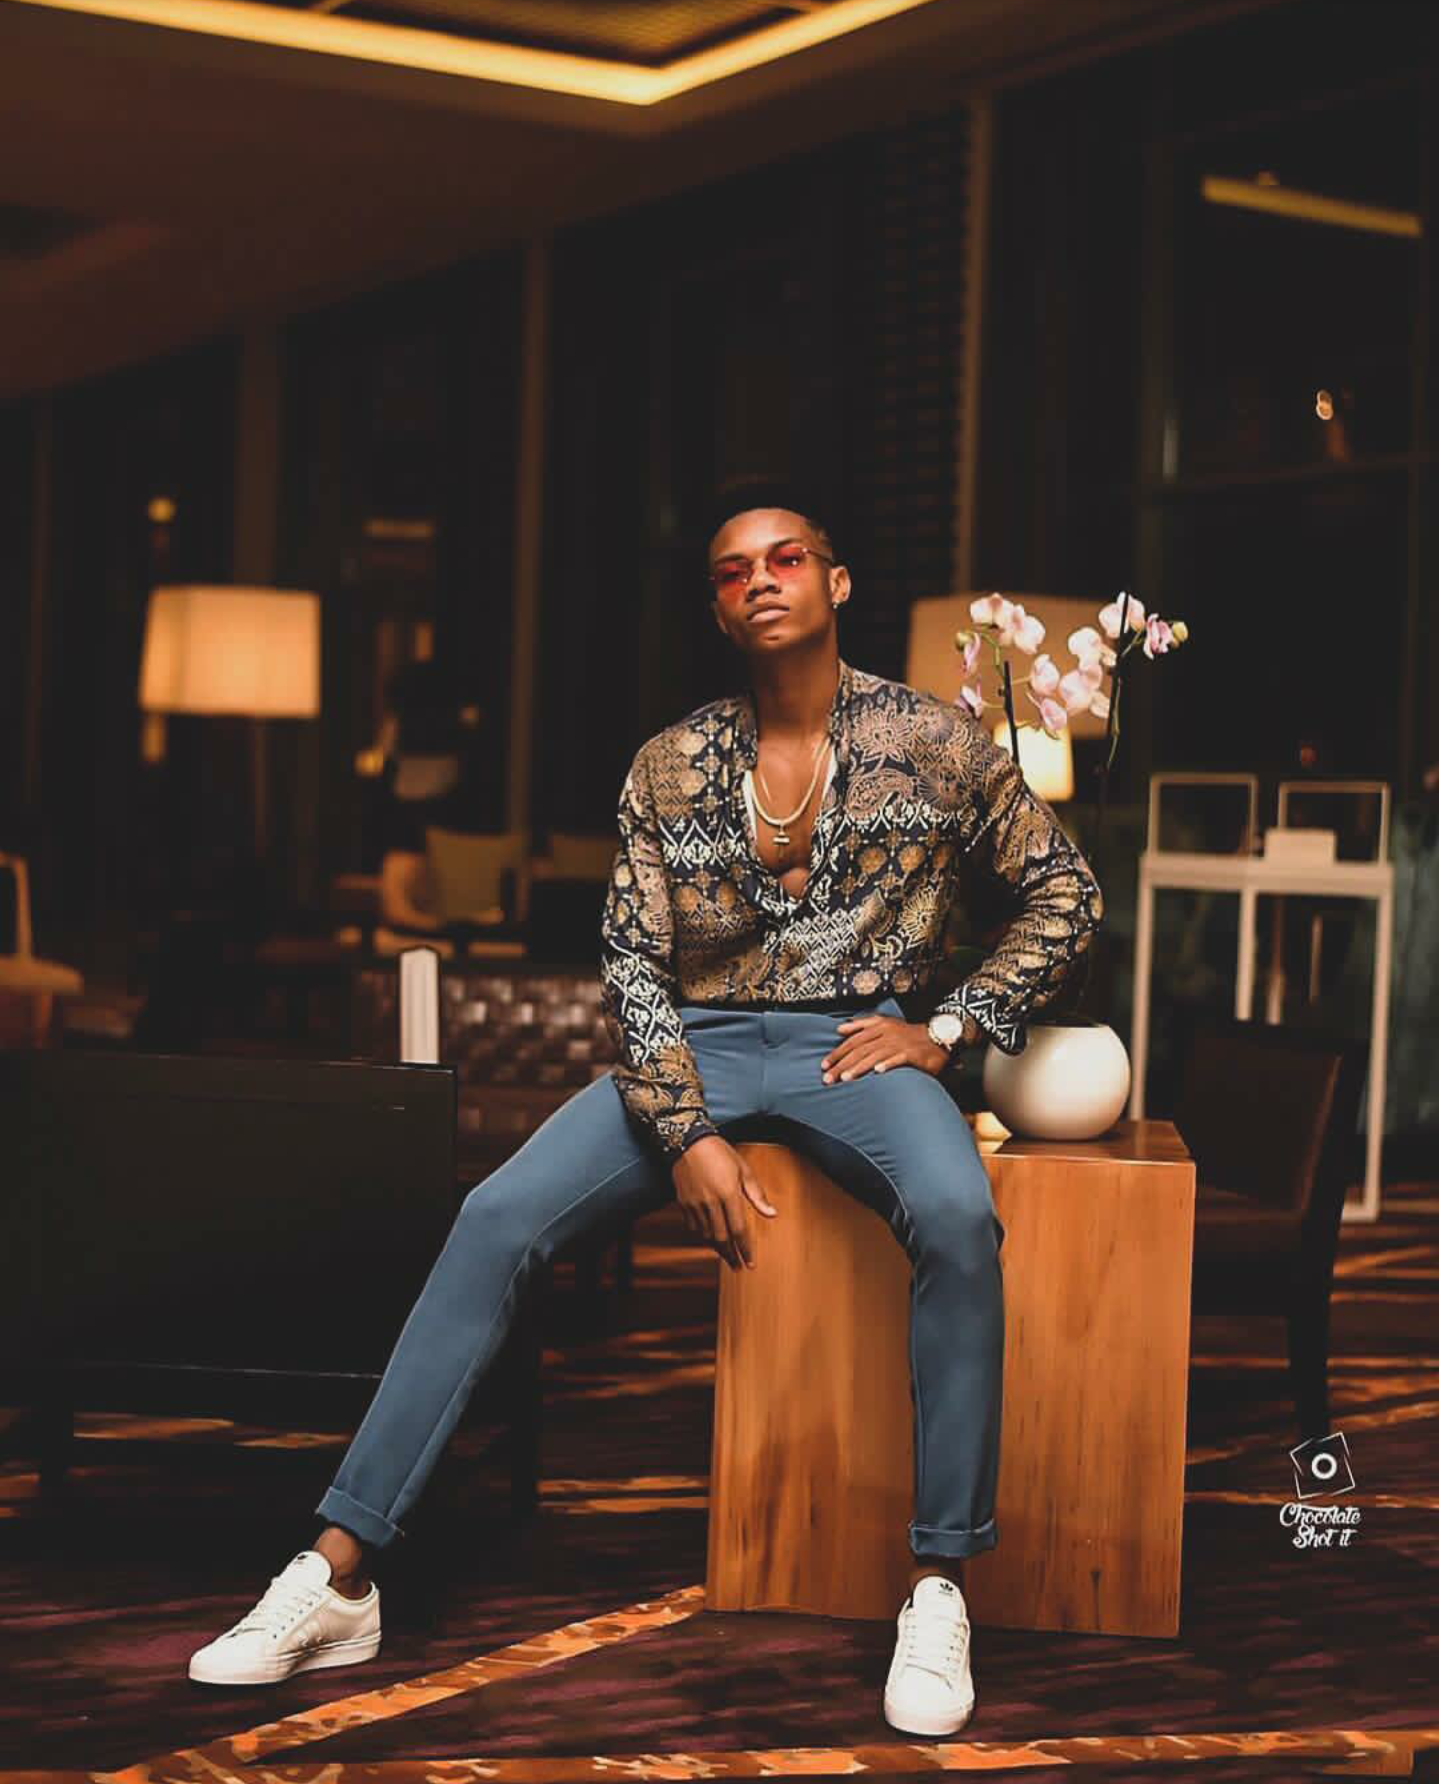 Kidi served stylishly casual inspiration in this pant and shirt over sneakers